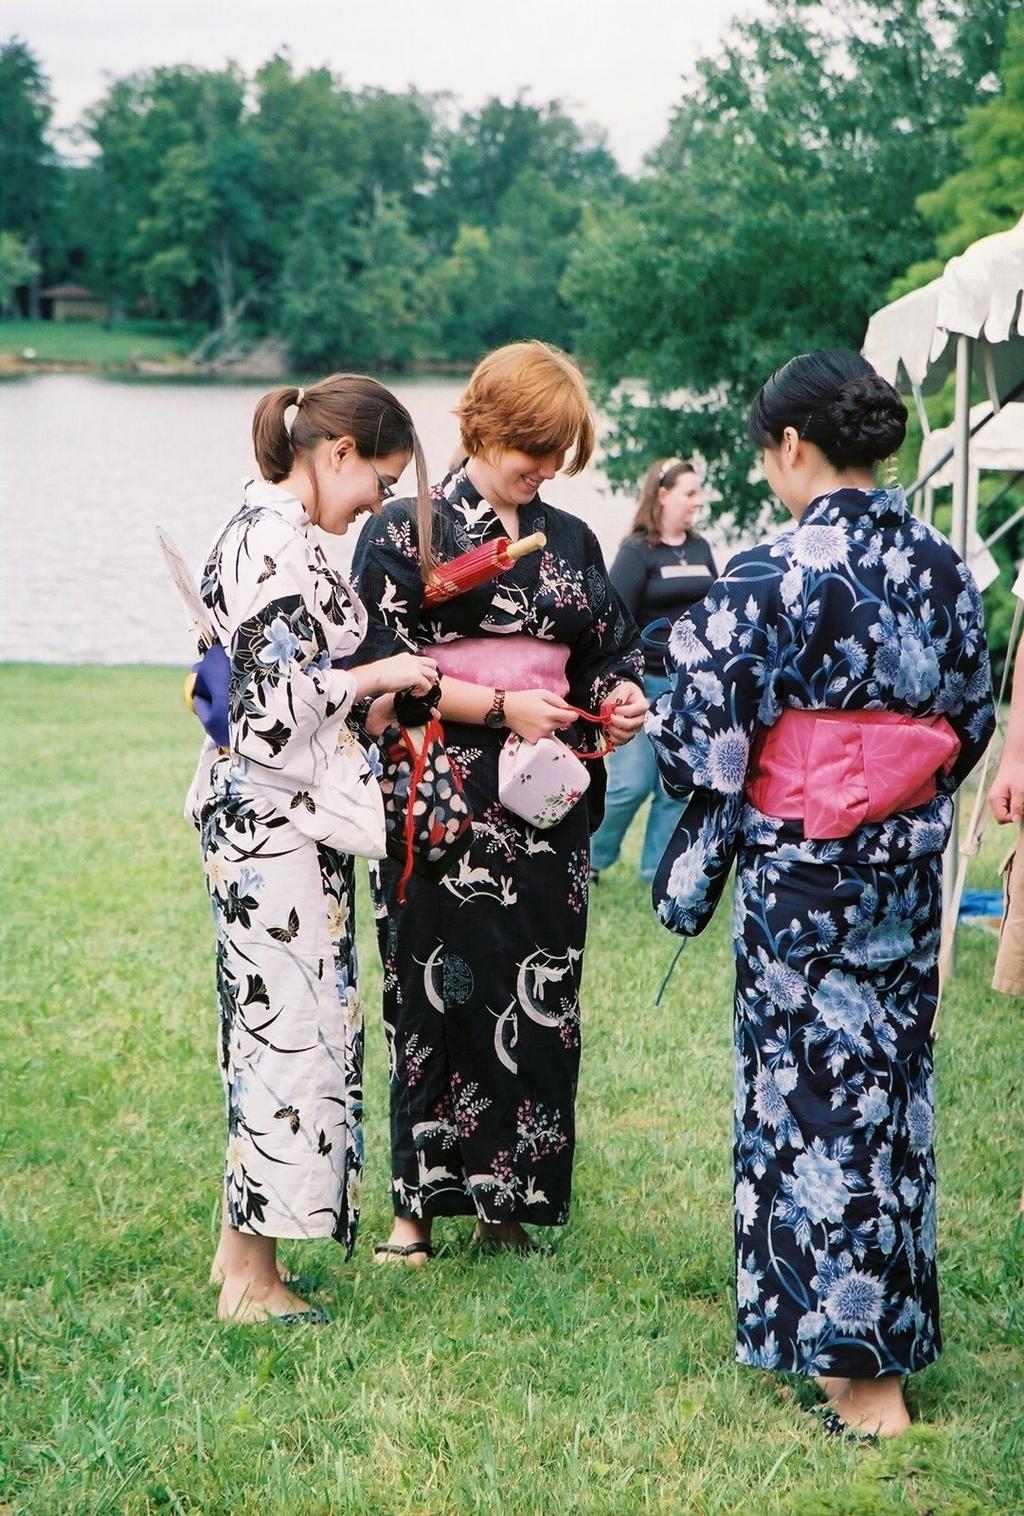 Kentucky Japan Summer Festival OVERVIEW T HE JAPAN SUMMER FESTIVAL is Kentucky s largest Japanese Festival, with the goal of bringing traditional and modern Japanese culture to Kentucky, and